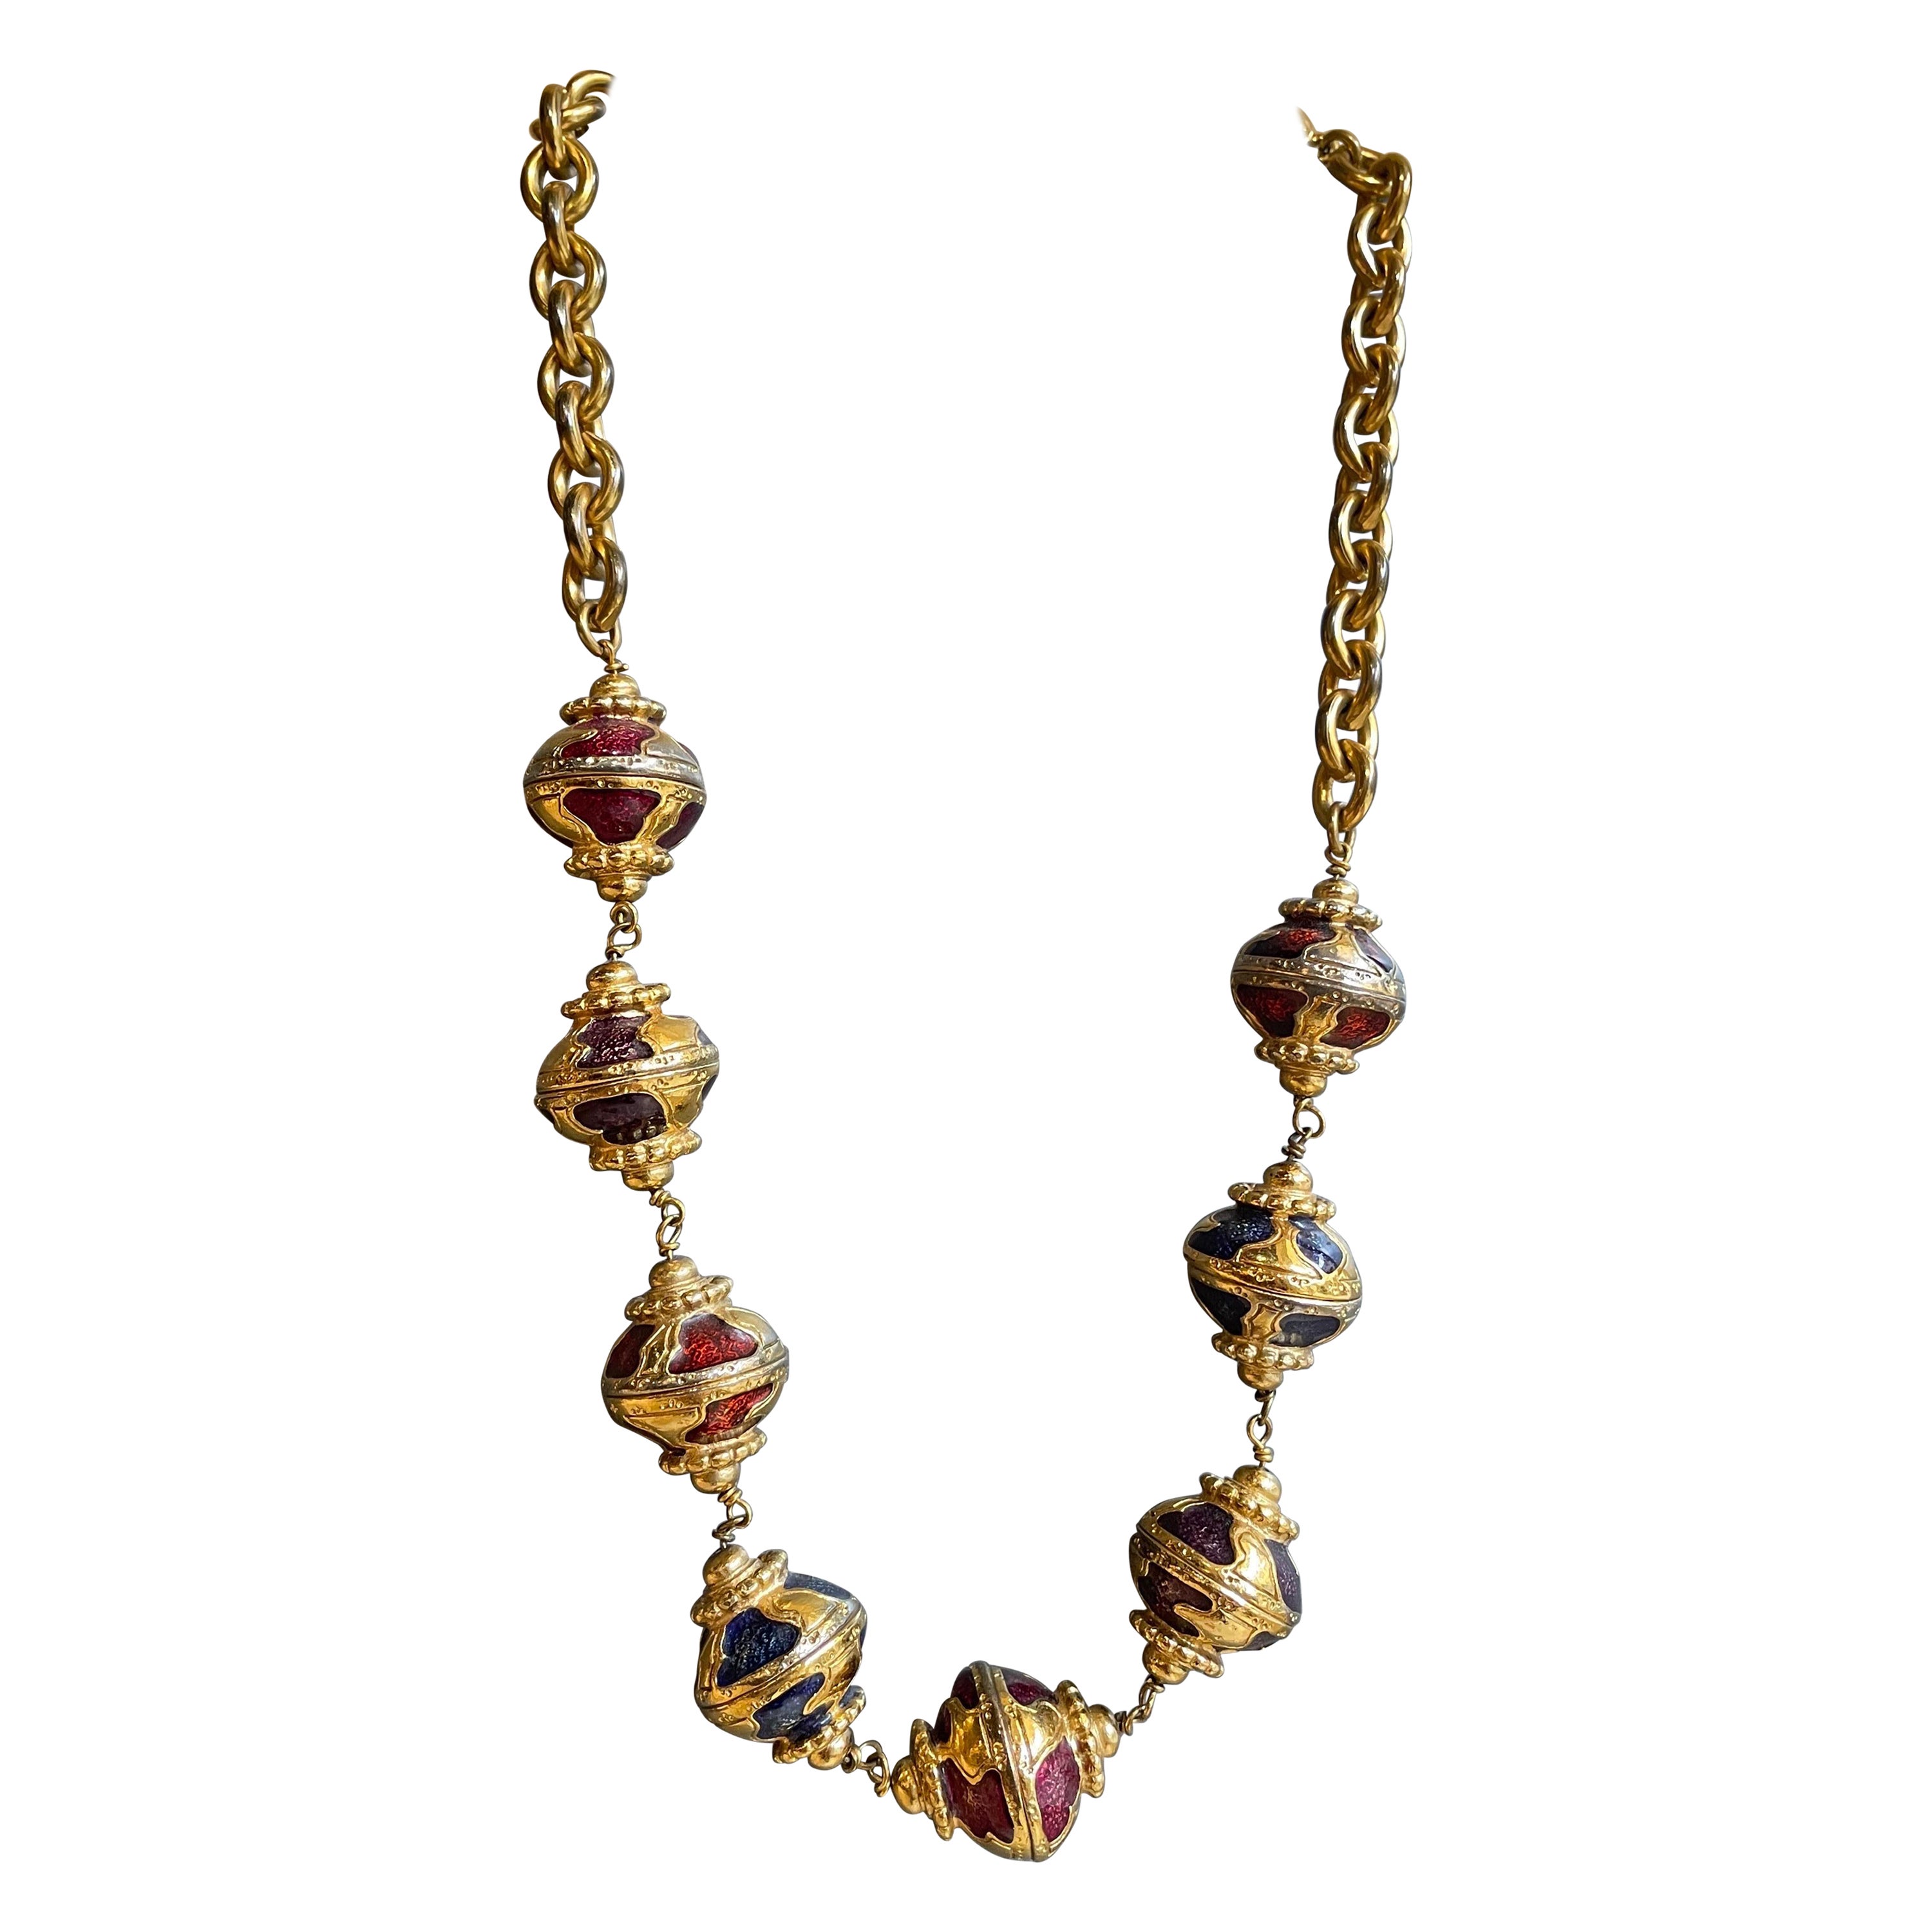 Yves Saint Laurent necklace Russian collection 1976. For Sale